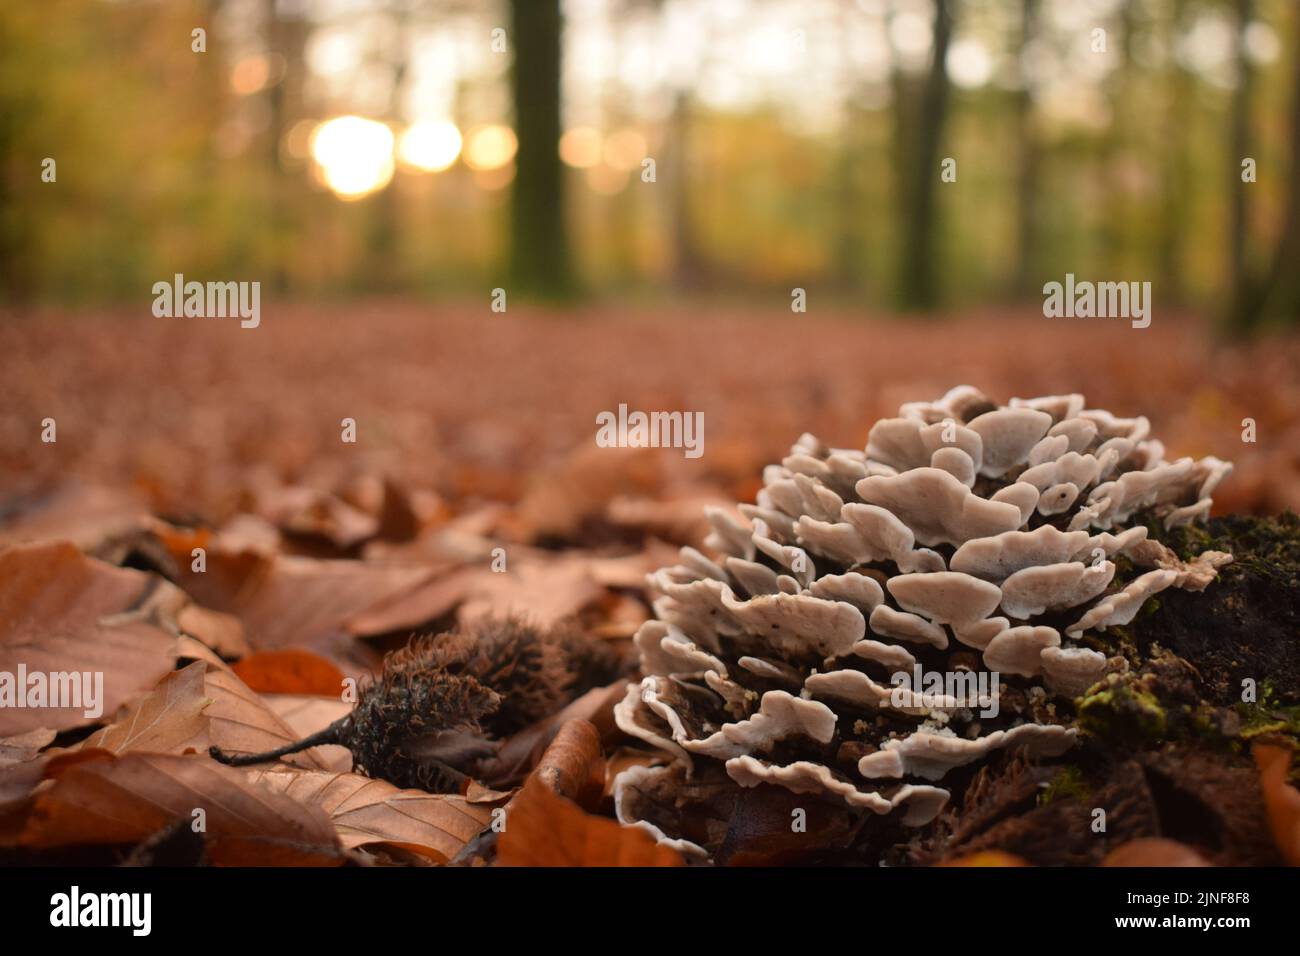 The Fungus on a rotting tree stump with dry autumn leaves on the ground Stock Photo